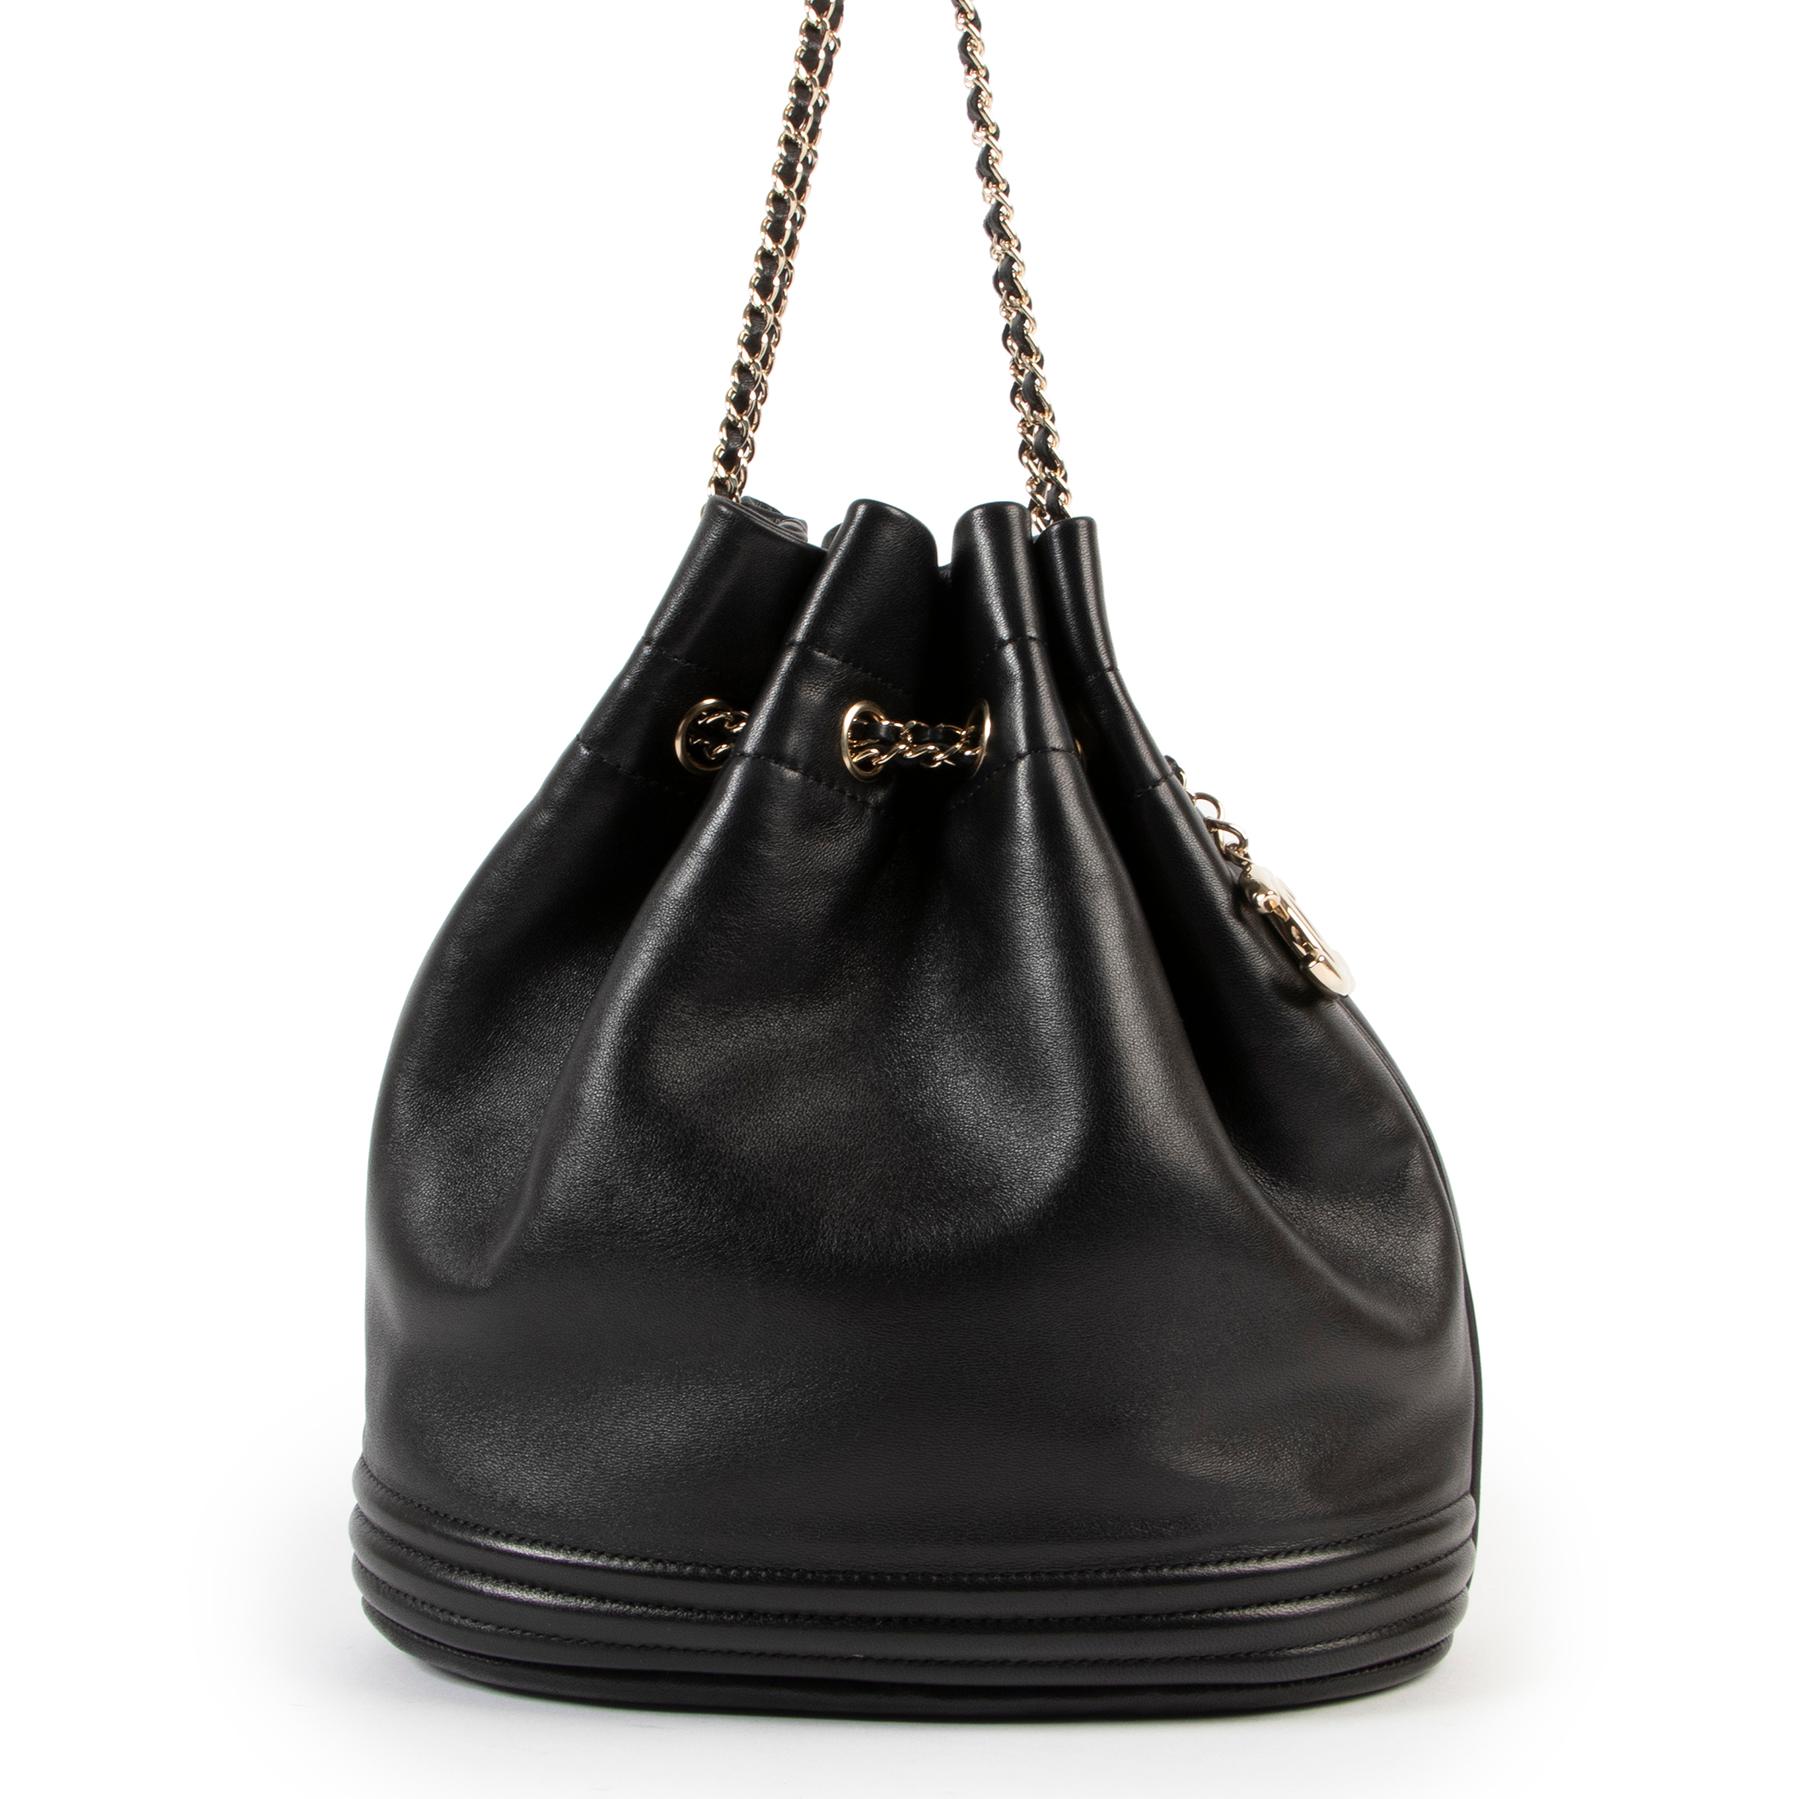 Chanel Black Leather Bucket Bag

Oh, yes! Bucket bags are back in style, and we have this beautiful Chanel version waiting for you. 

Crafted from soft lambskin leather, and finished with silver-toned hardware. On the inside you'll find one main